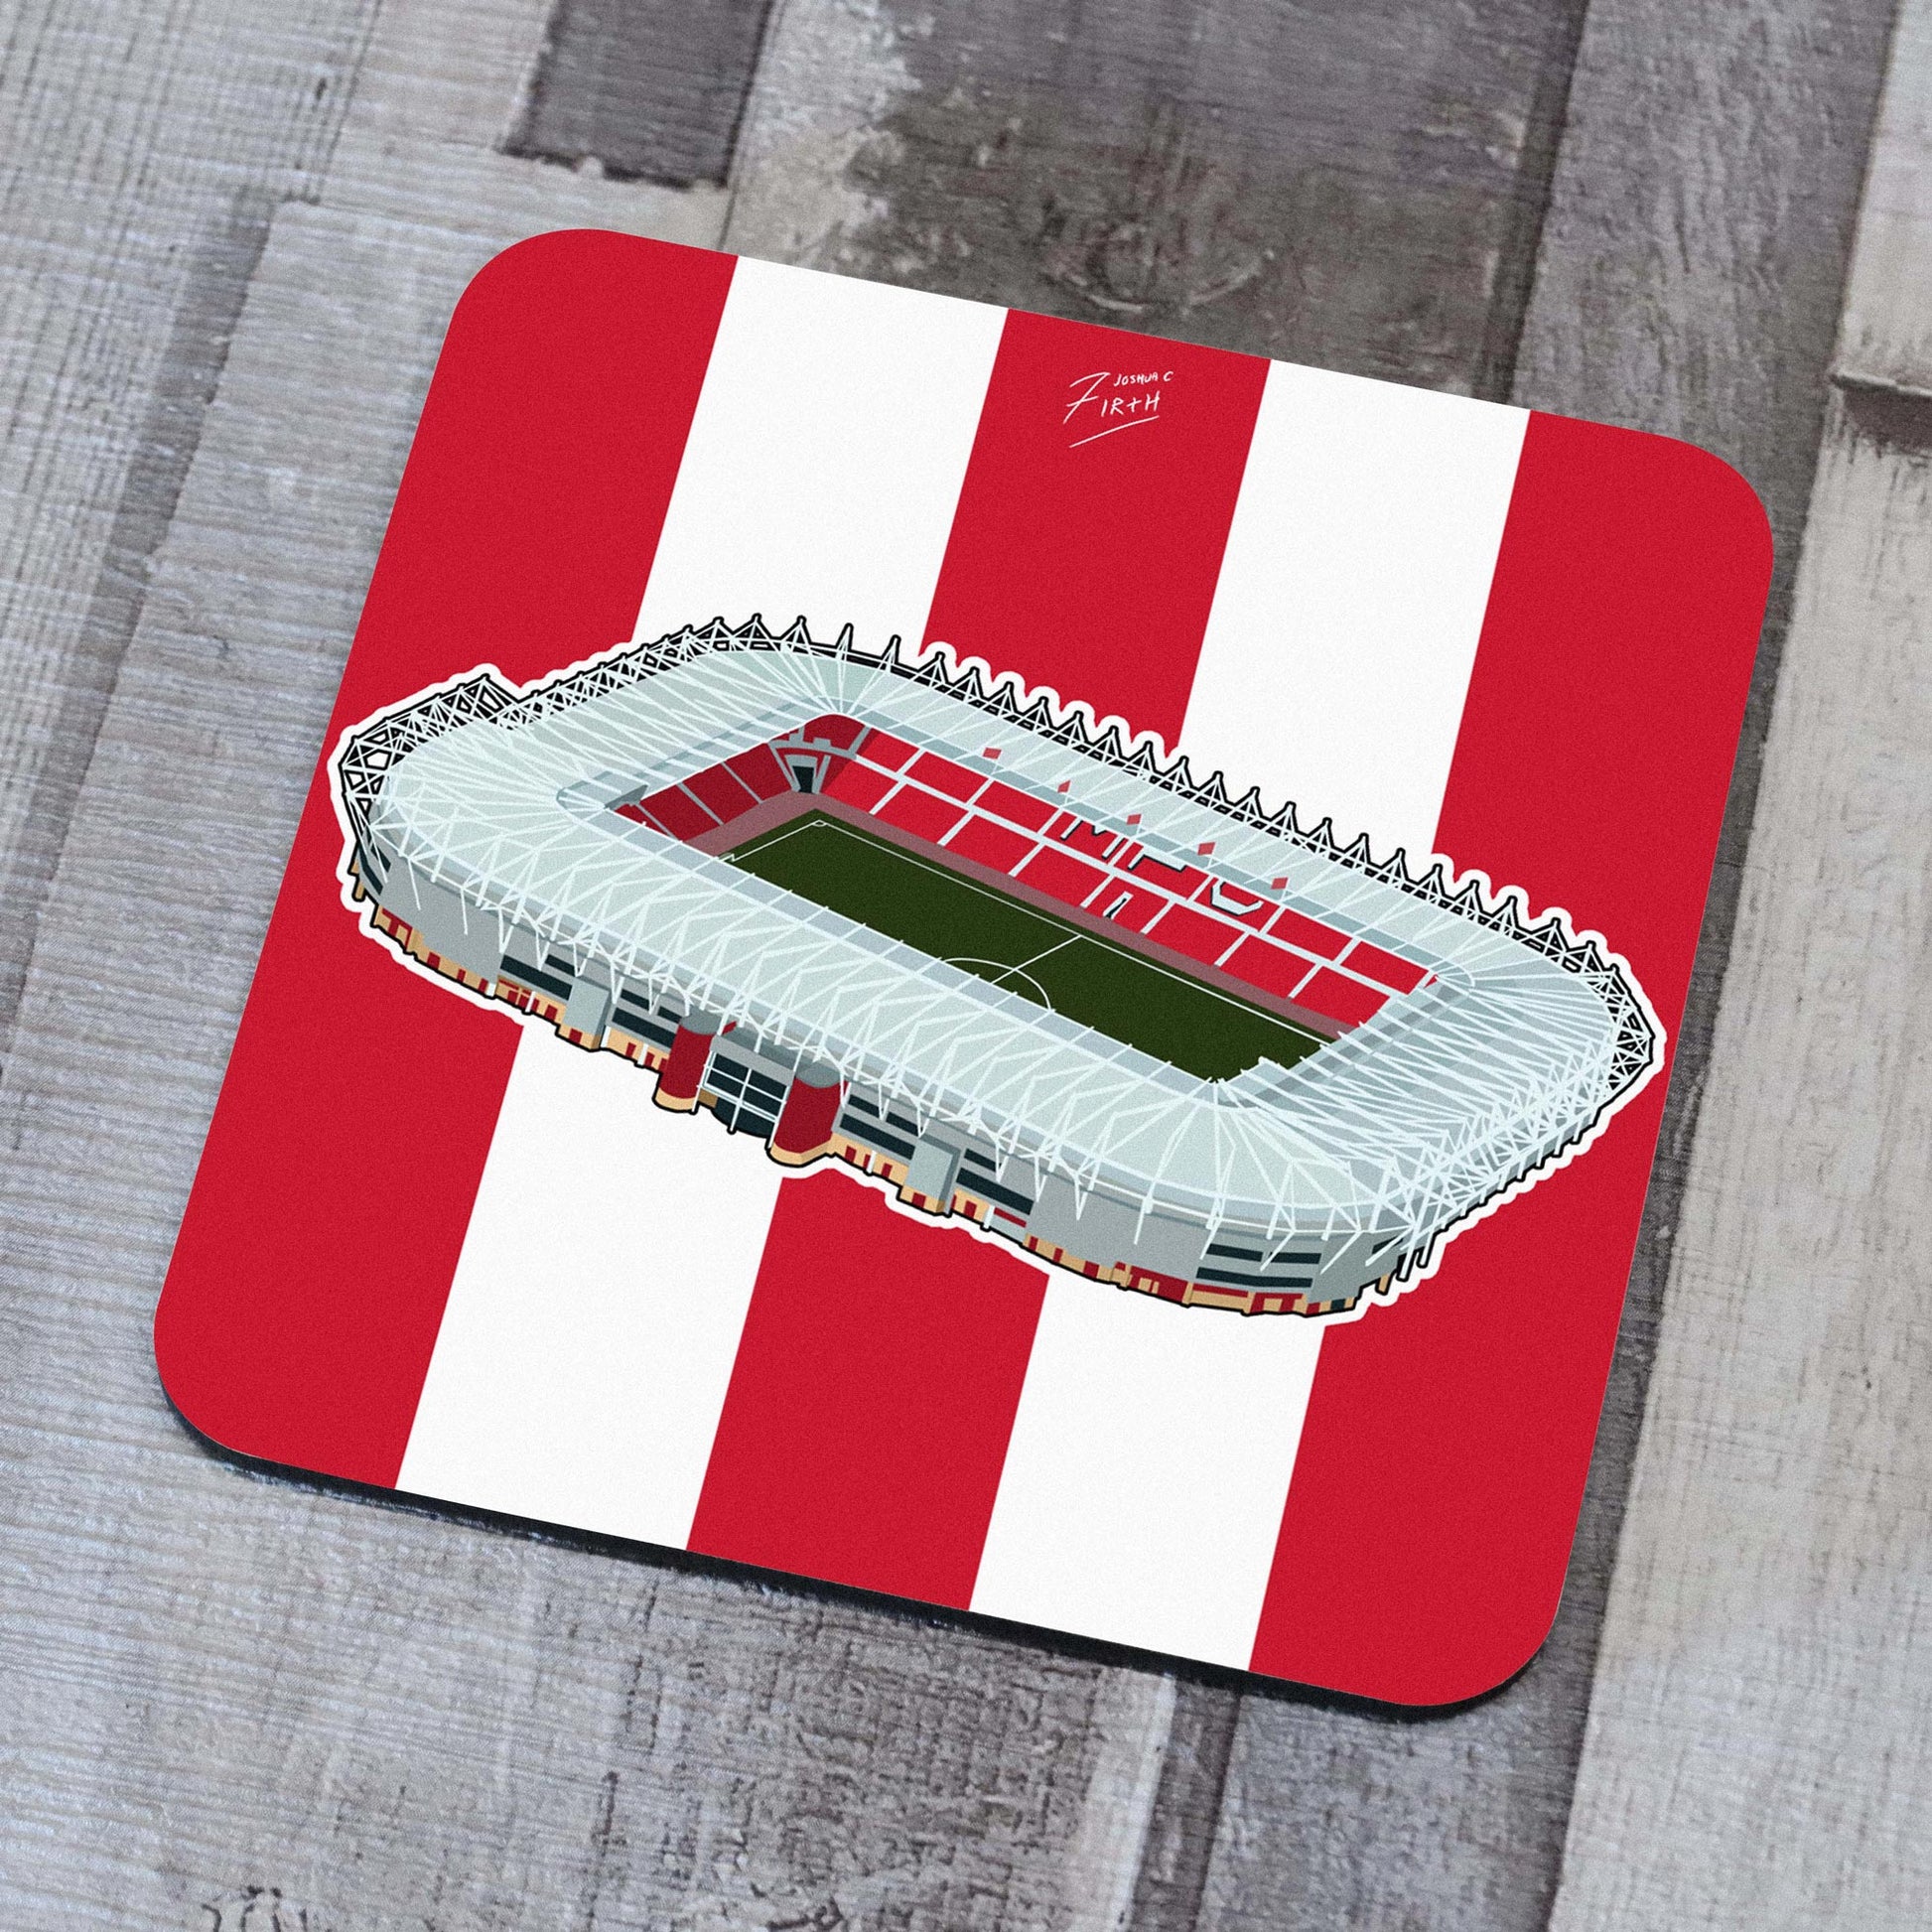 Coaster featuring artwork of Middlesbrough Football Club's home, the Riverside Stadium, North Yorkshire